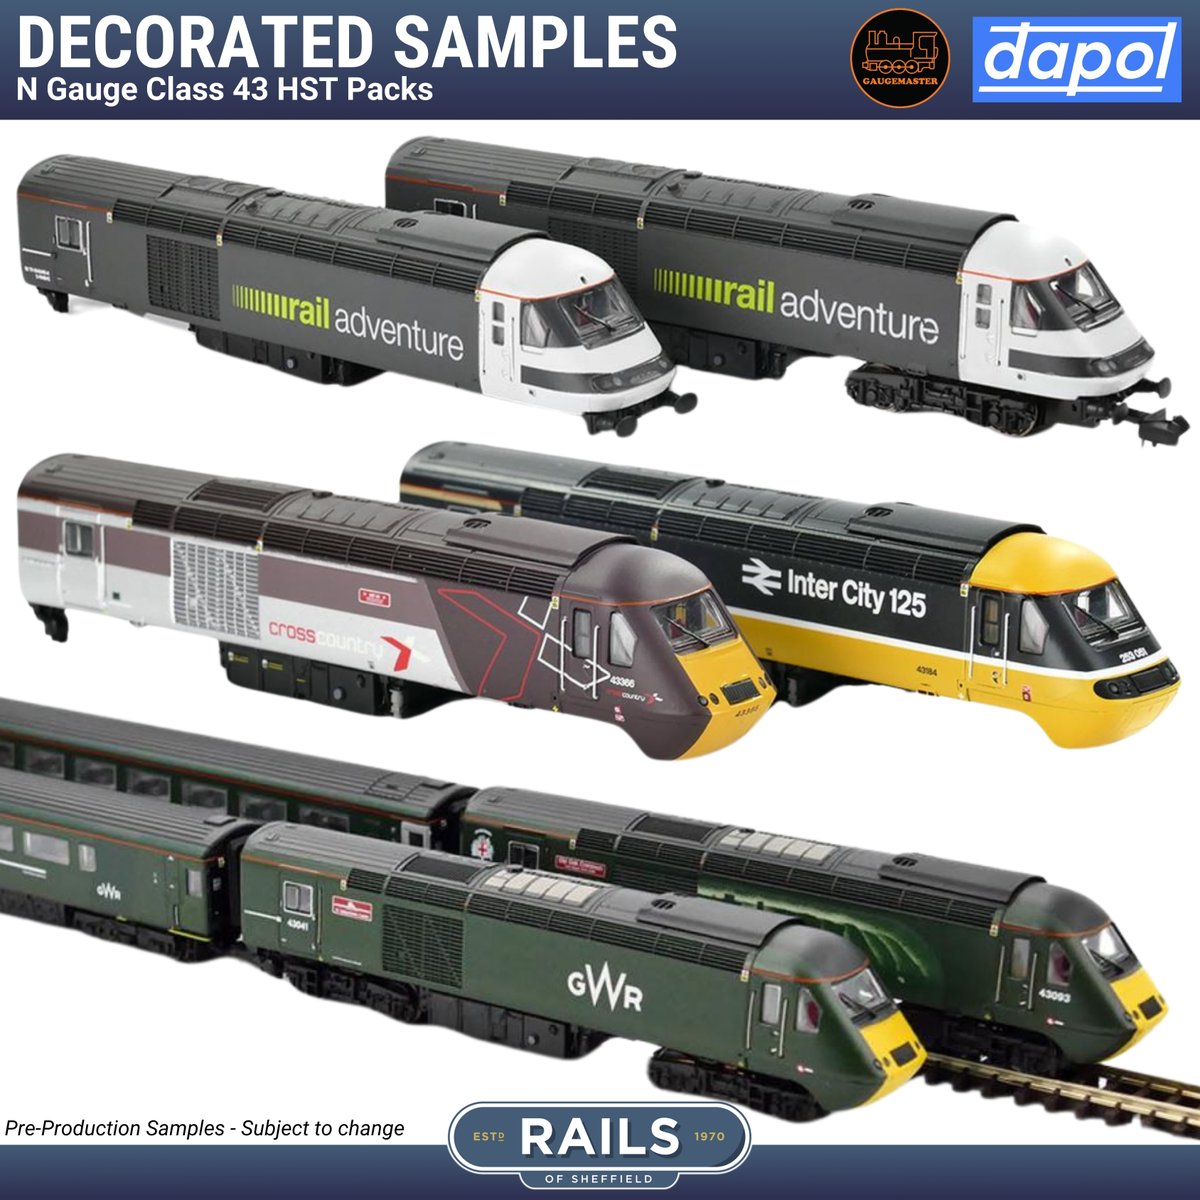 🚅 Gaugemaster have revealed decorated samples for their new Dapol N Gauge Class 43 HST Packs in RailAdventure and Cross Country/ Intercity liveries! Pre-order now from £157.20: tinyurl.com/ypxzp8m4

As previously mentioned a final run of the popular GWR Castle set is due too.